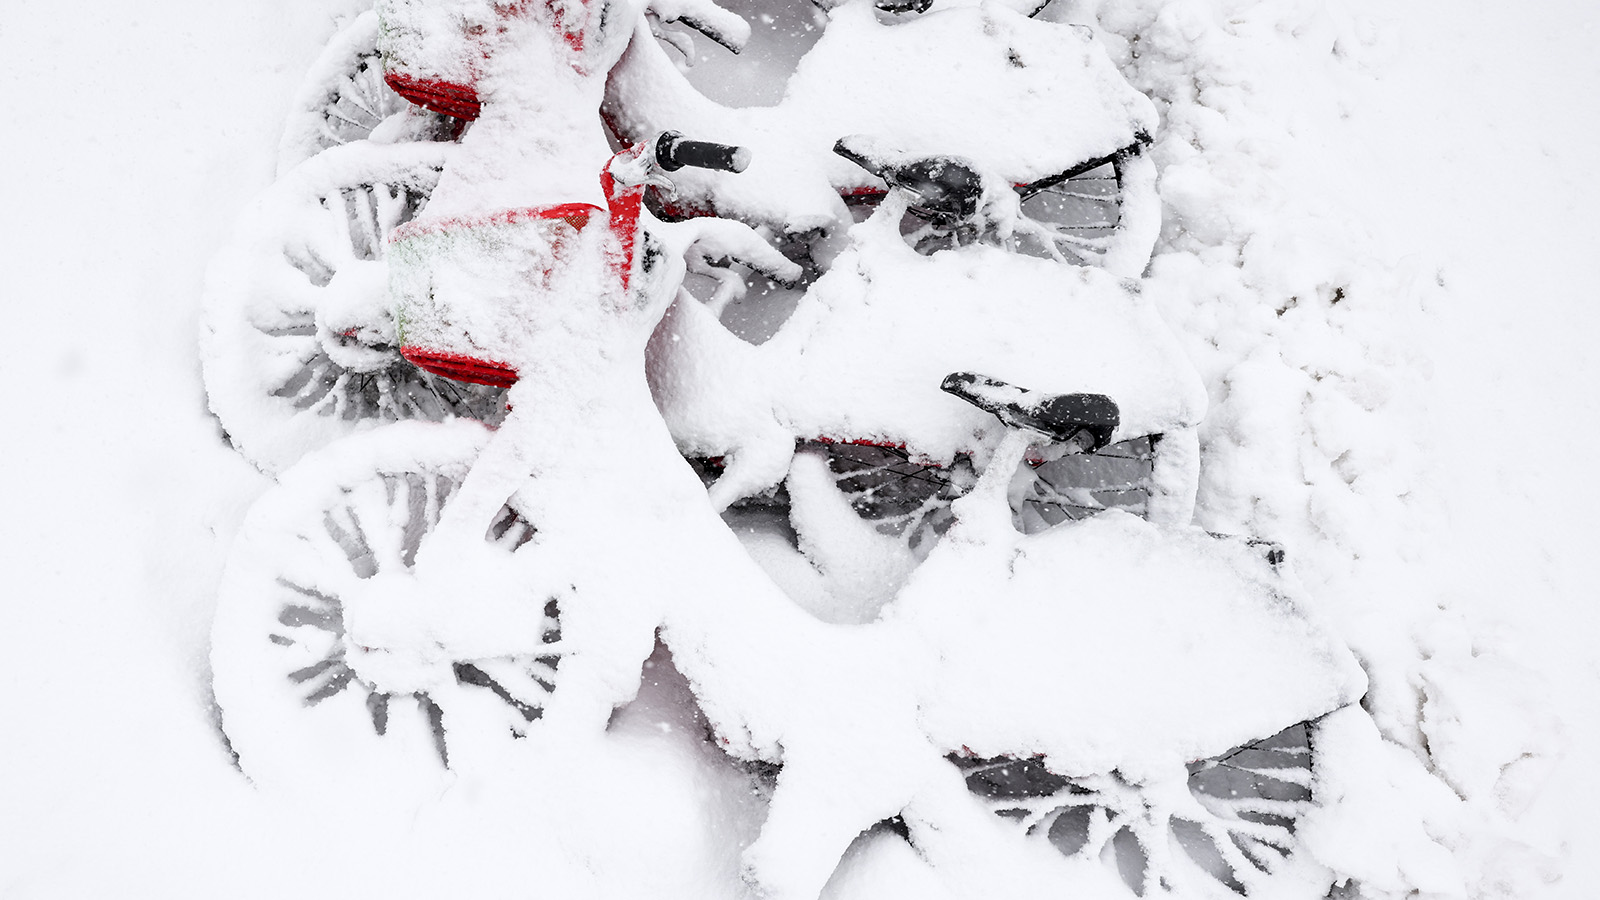 Bicycles sit covered in snow on March 14, 2021 in Denver.